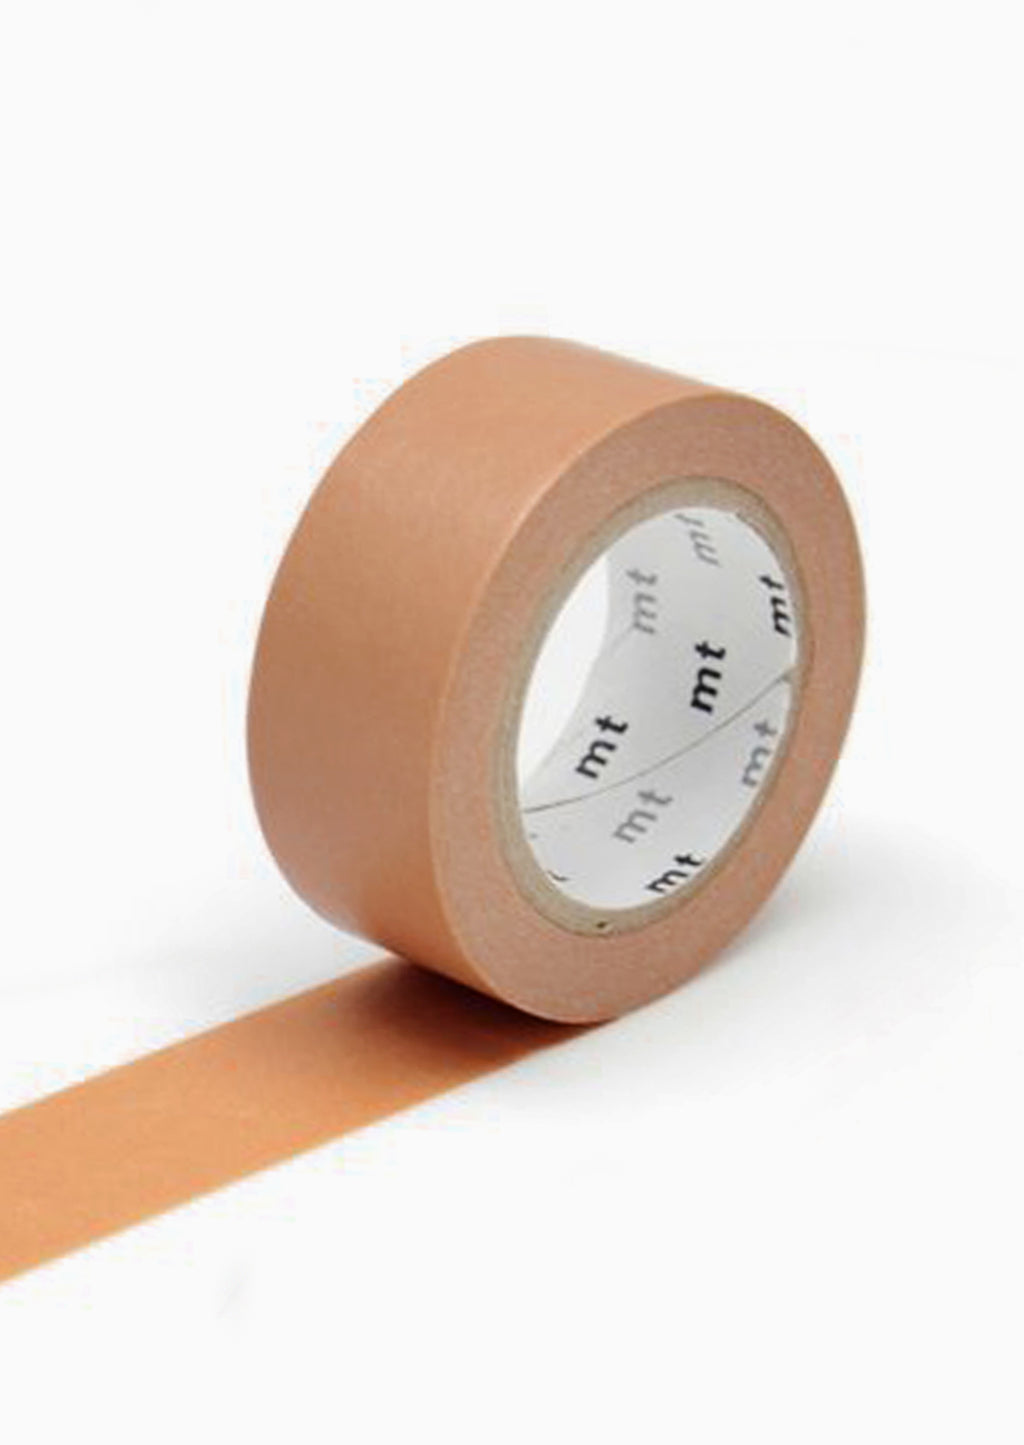 Cafe Au Lait: A roll of washi tape in cork brown color.